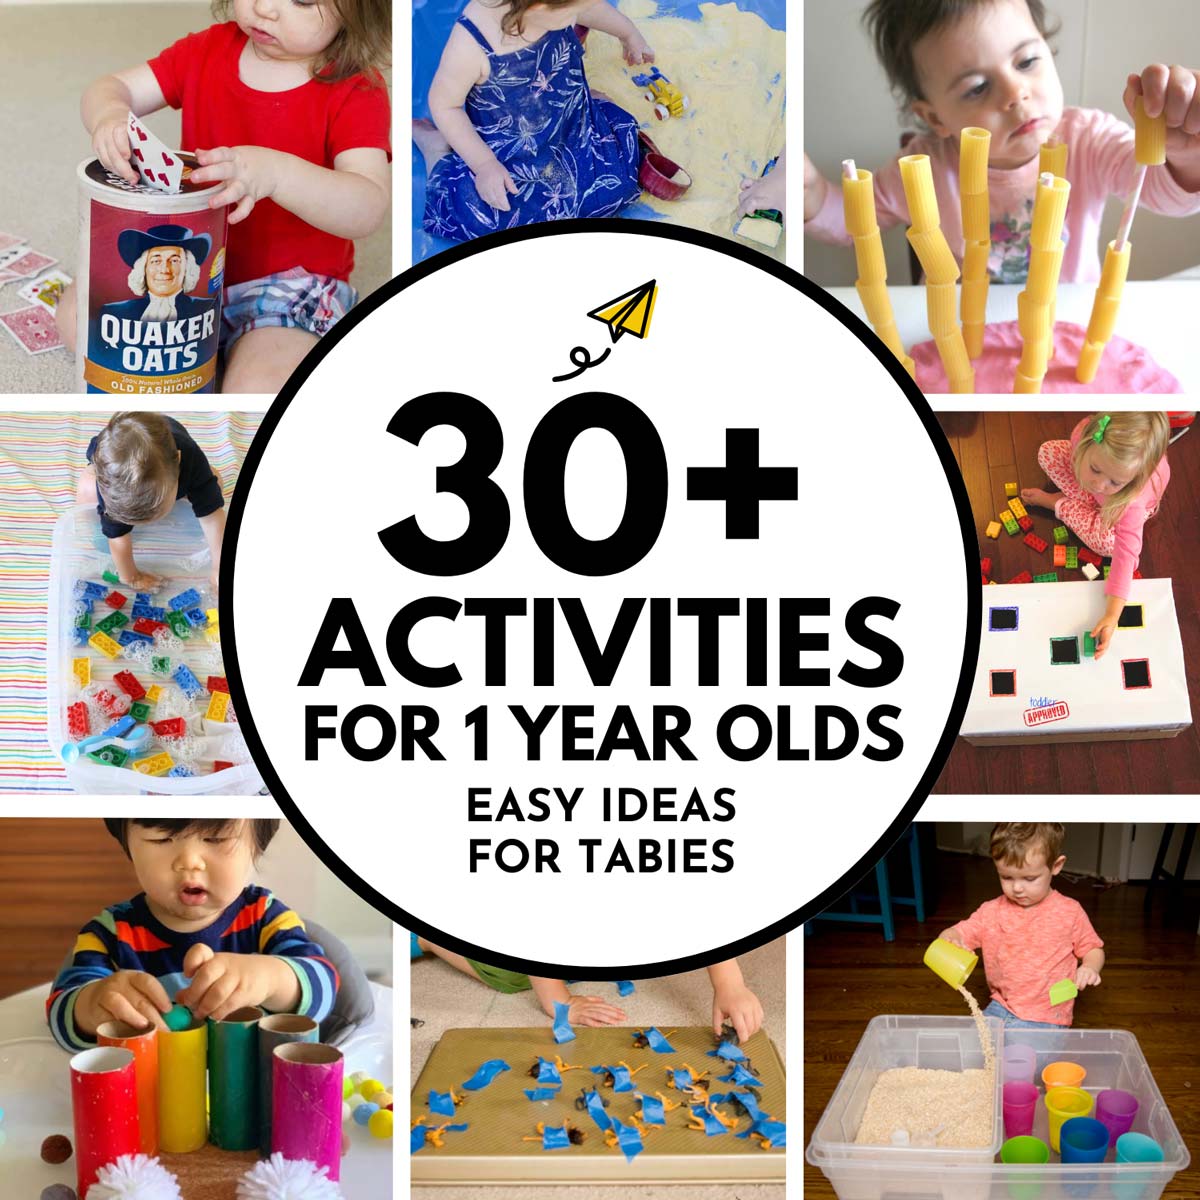 30+ easy ideas for one-year-olds. Images is a collage of 8 photos showing some of the activities